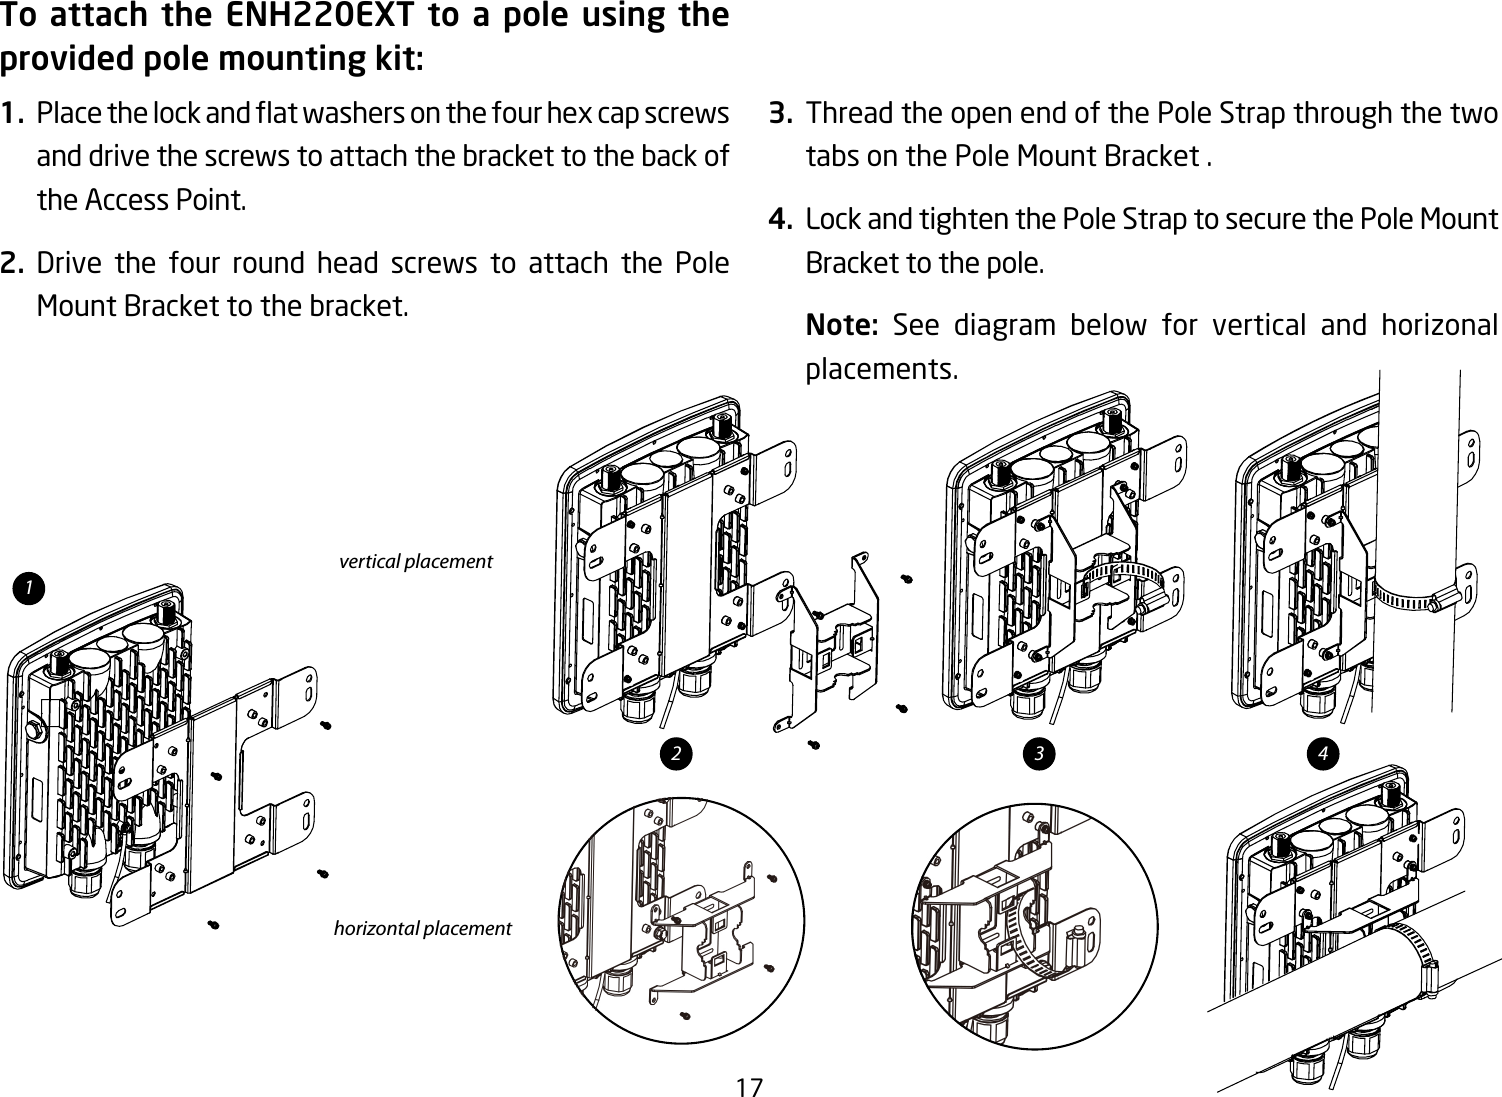 17To attach the ENH220EXT to a pole using the provided pole mounting kit:1. Placethelockandatwashersonthefourhexcapscrewsand drive the screws to attach the bracket to the back of the Access Point.2. Drive the four round head screws to attach the Pole Mount Bracket to the bracket.   3.  Thread the open end of the Pole Strap through the two tabs on the Pole Mount Bracket .4.  Lock and tighten the Pole Strap to secure the Pole Mount Bracket to the pole.Note:  See diagram below for vertical and horizonal placements.vertical placementhorizontal placement12 43